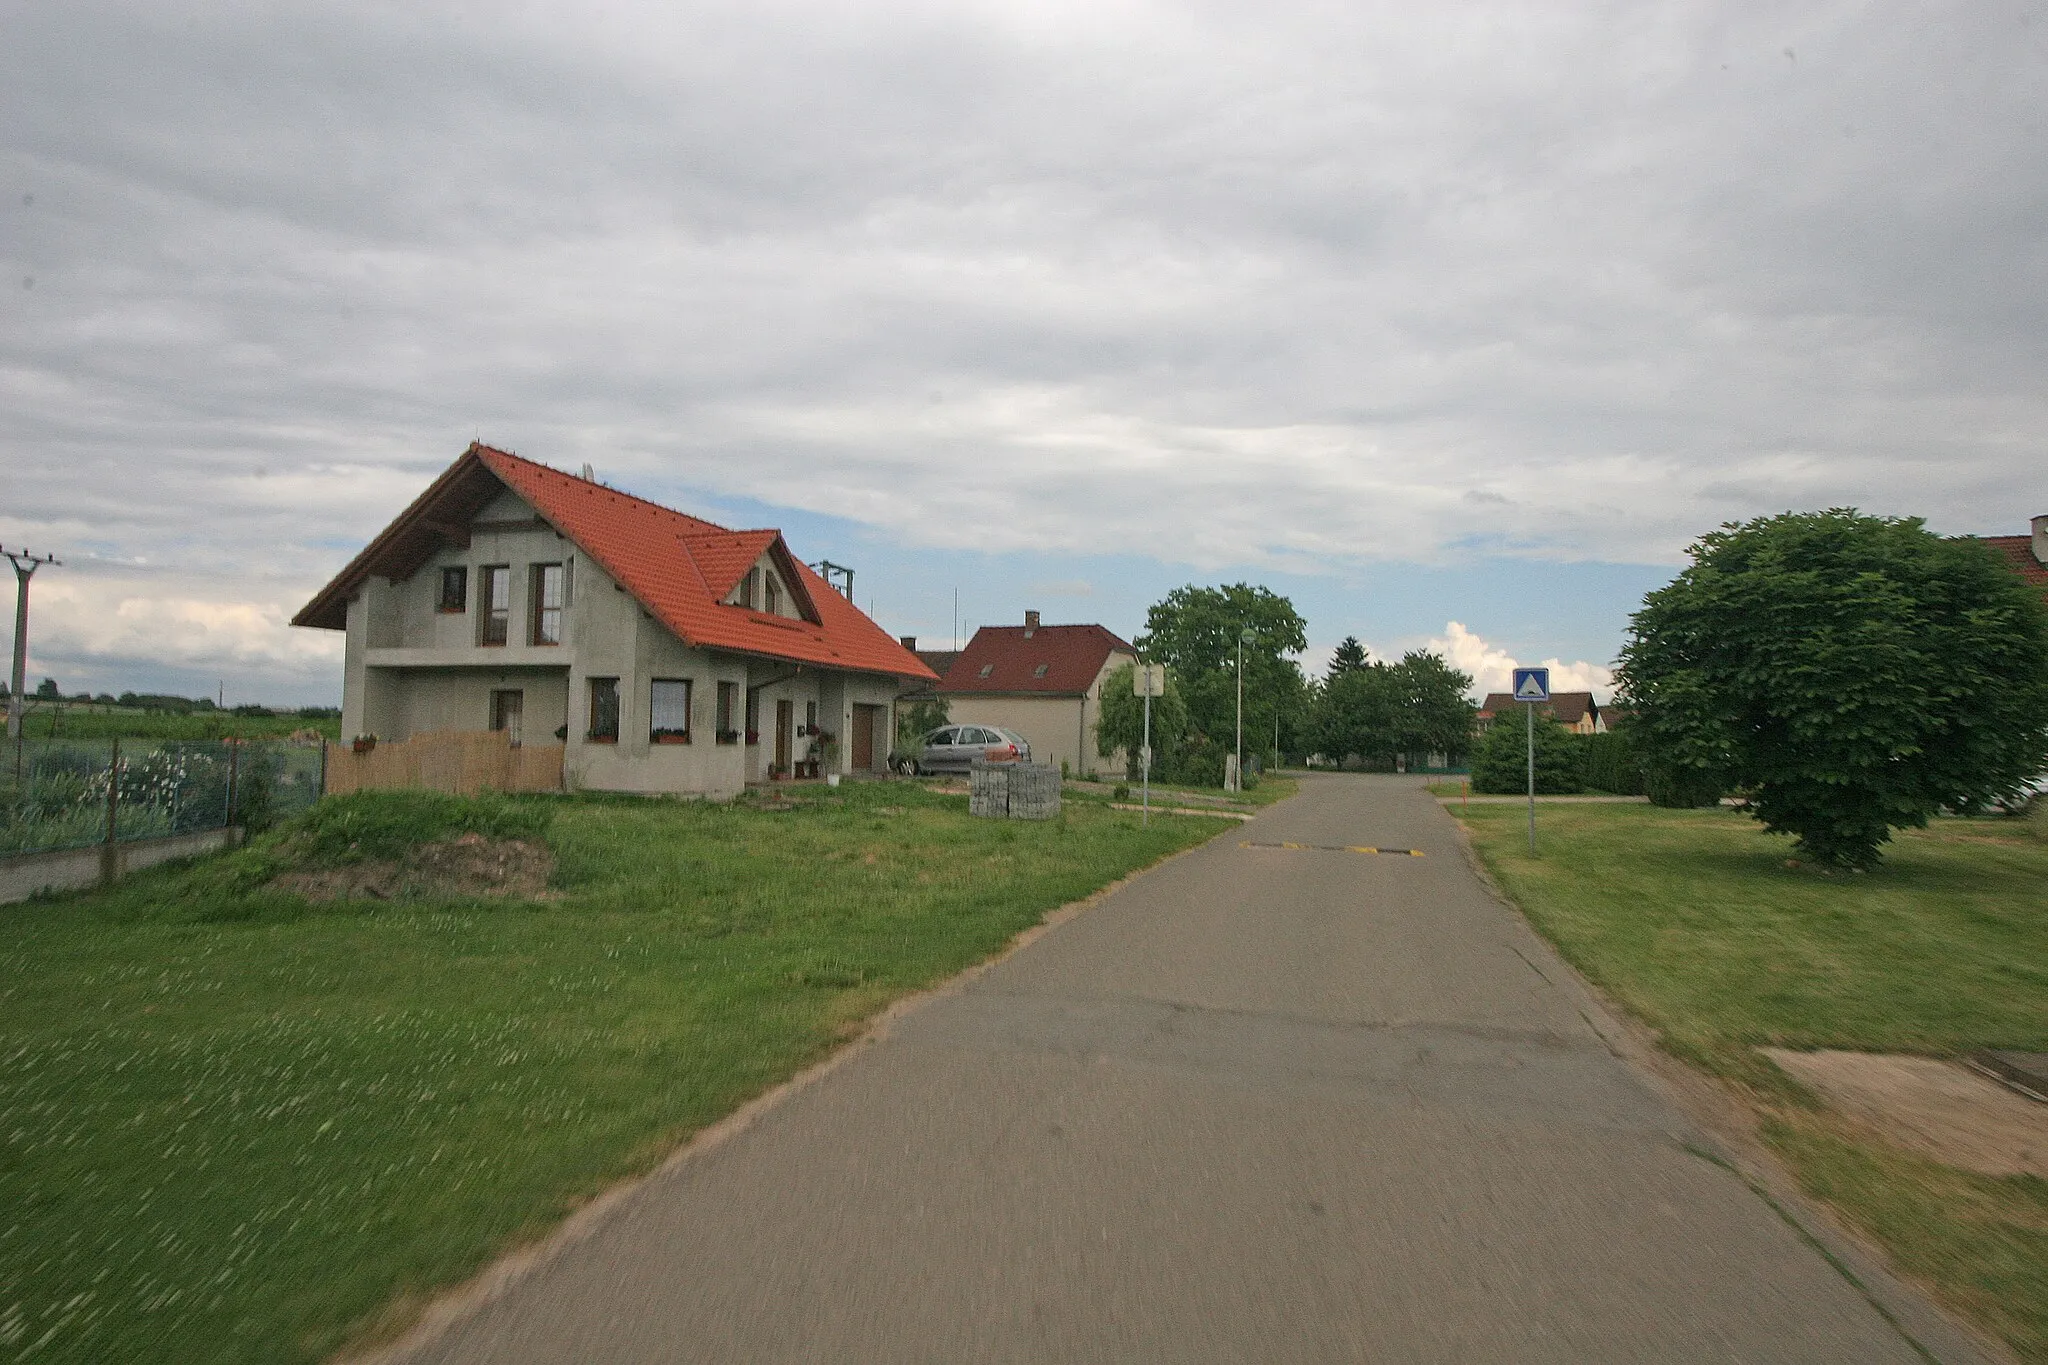 Photo showing: Sovětice novostavba
Camera location 50° 18′ 25.71″ N, 15° 42′ 34.6″ E View this and other nearby images on: OpenStreetMap 50.307142;   15.709611

This file was created as a part of the photographic program of Wikimedia Czech Republic. Project: Foto českých obcí The program supports Wikimedia Commons photographers in the Czech Republic.